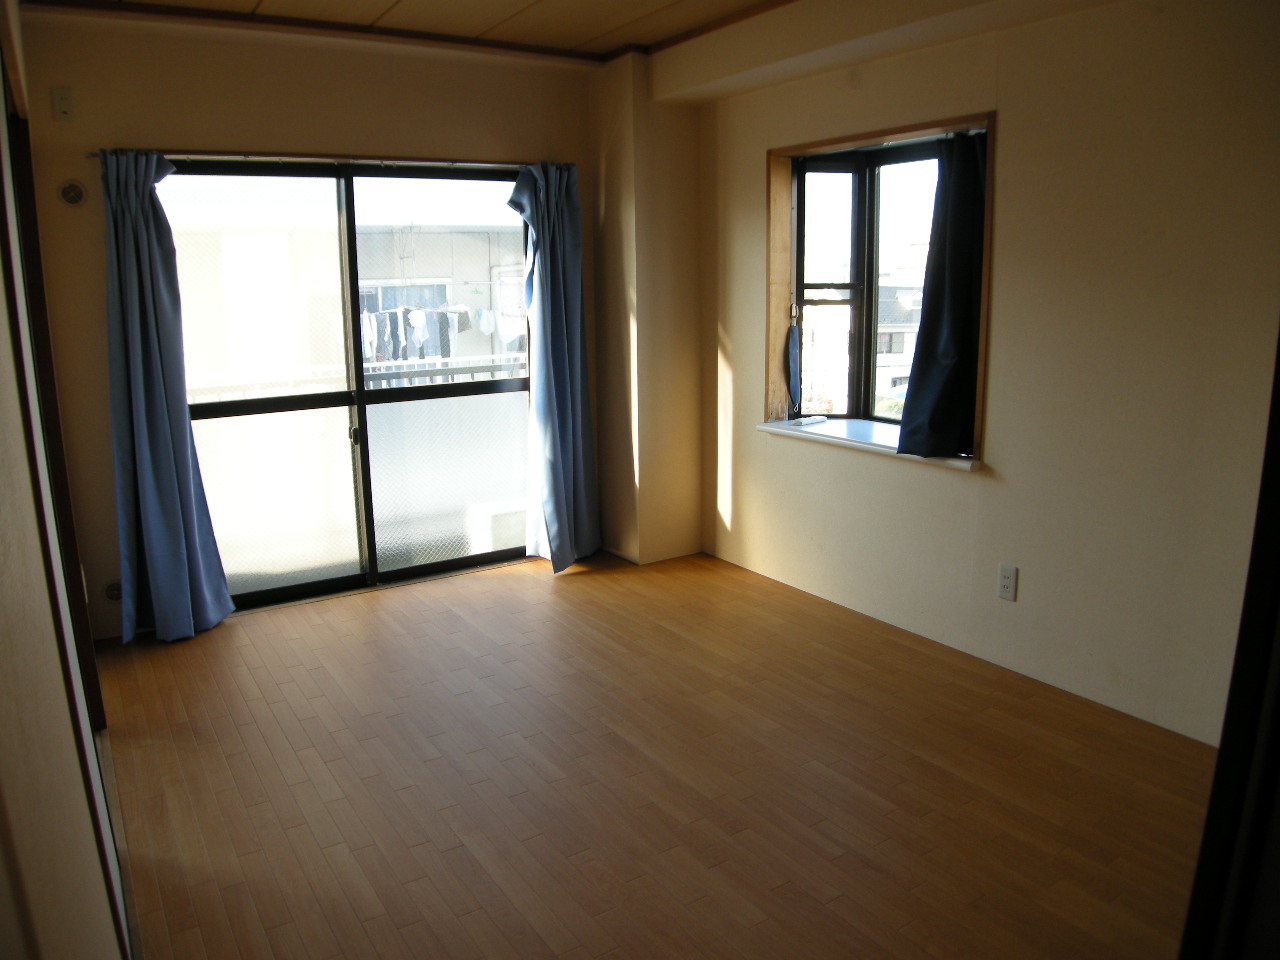 Other room space. There is a bay window per corner room